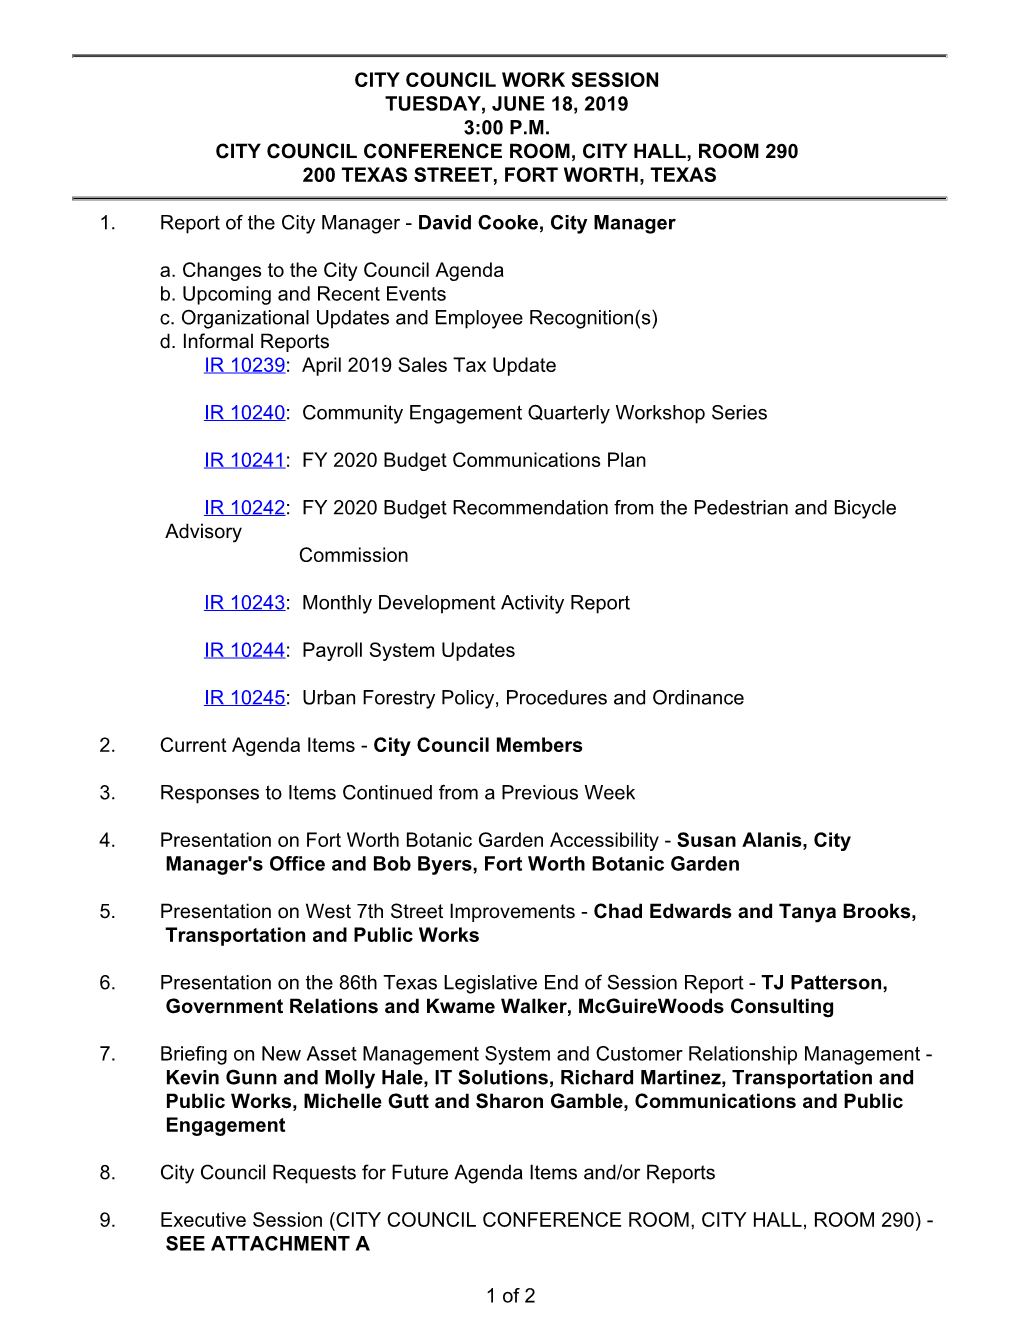 Electronic Council Packet for 06-18-2019